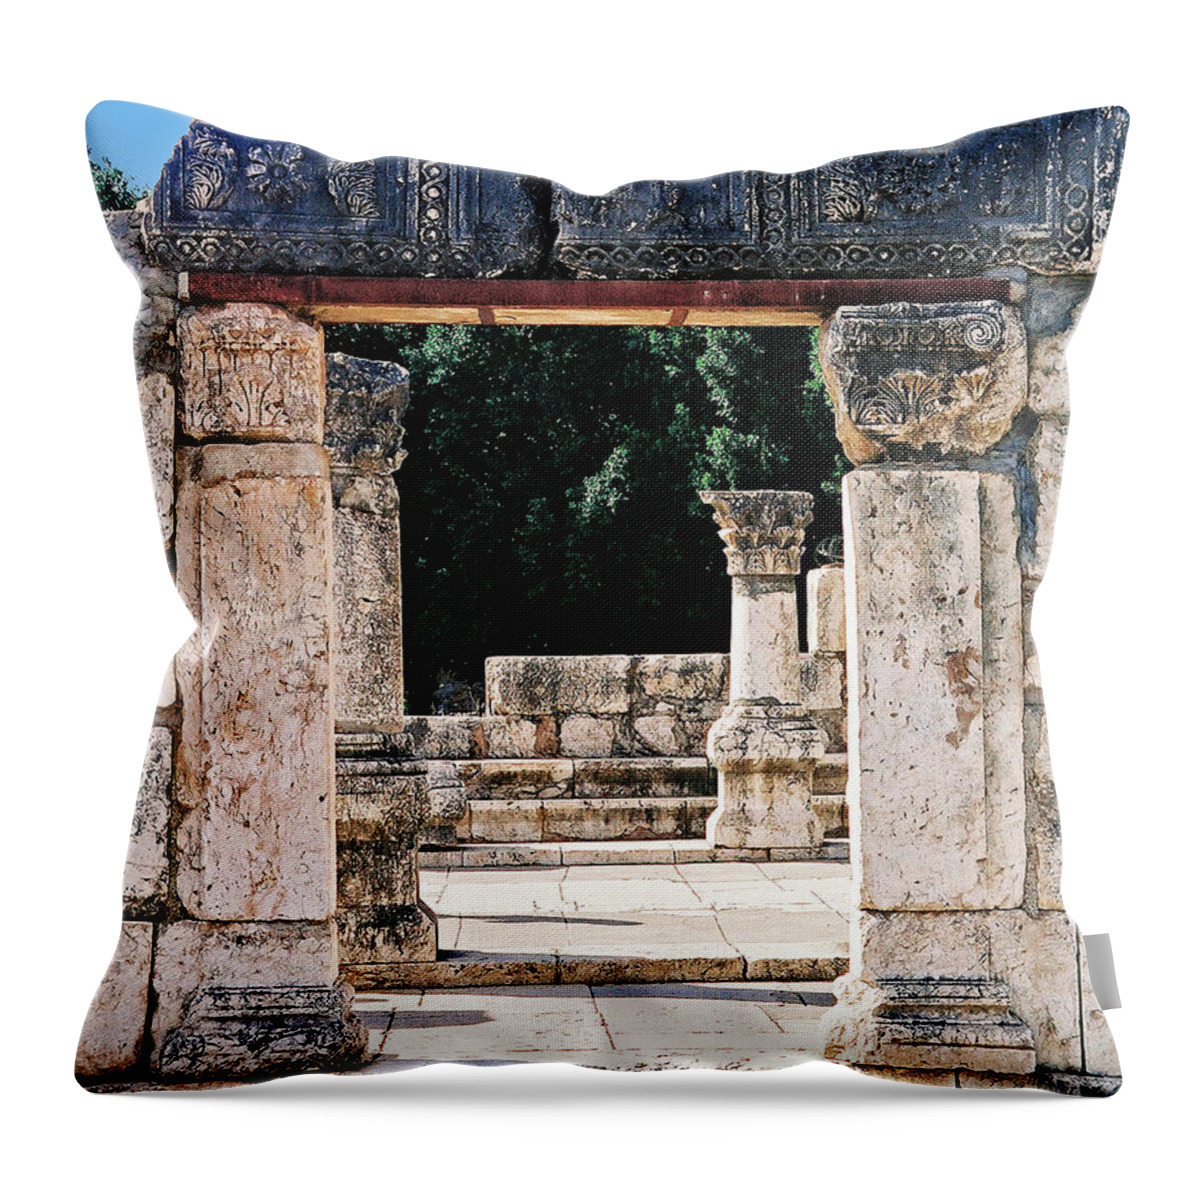 Israel Throw Pillow featuring the photograph Ancient Doors by Constance Woods